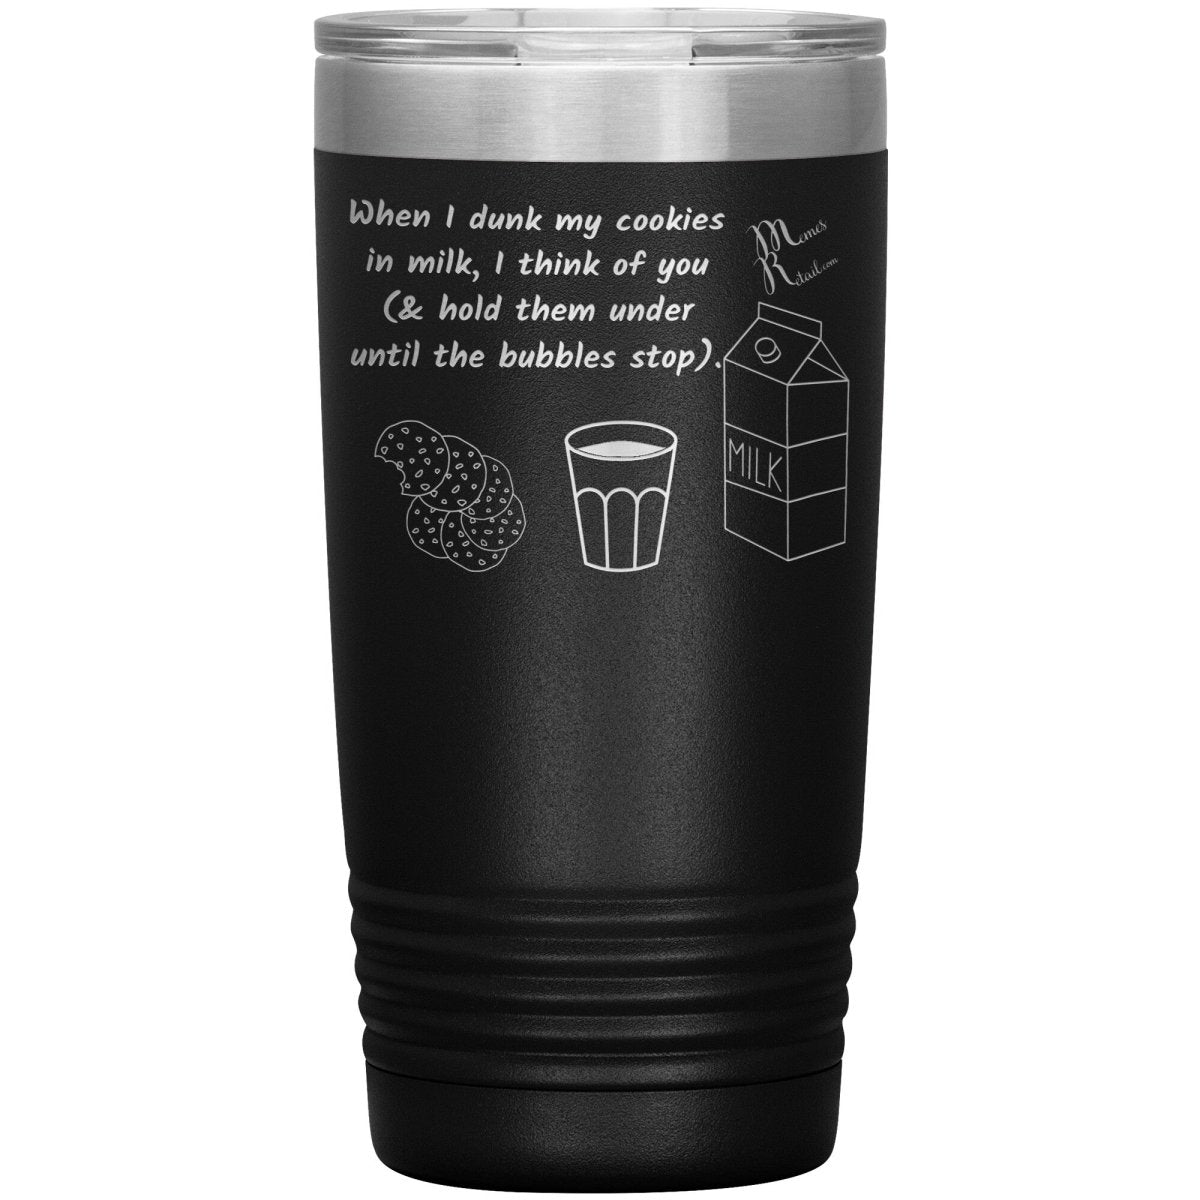 When I dunk My Cookies in Milk, I think of You - Tumblers, 20oz Insulated Tumbler / Black - MemesRetail.com